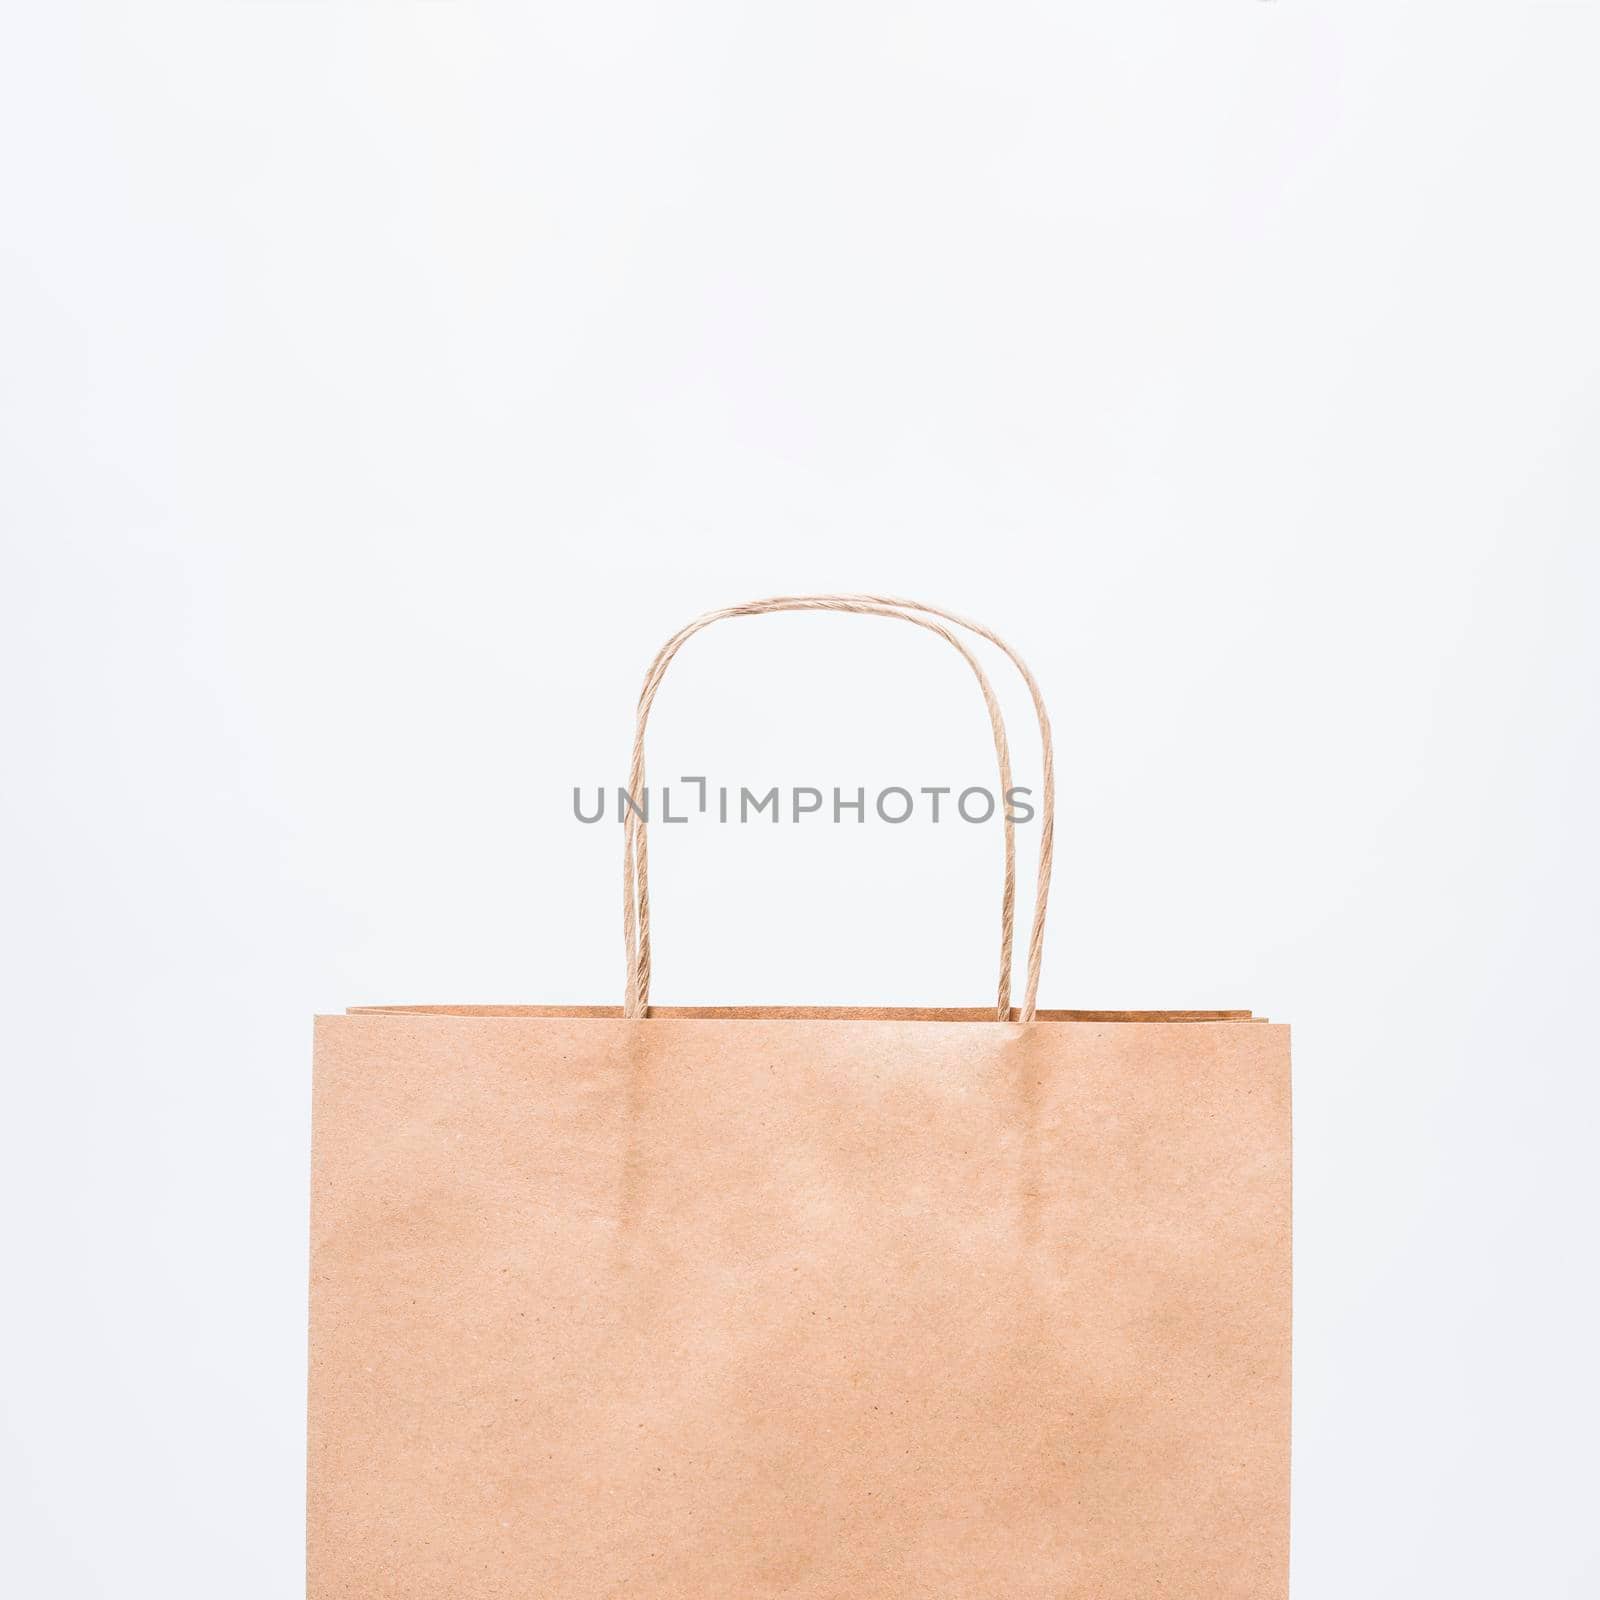 little shopping bag with handles by Zahard